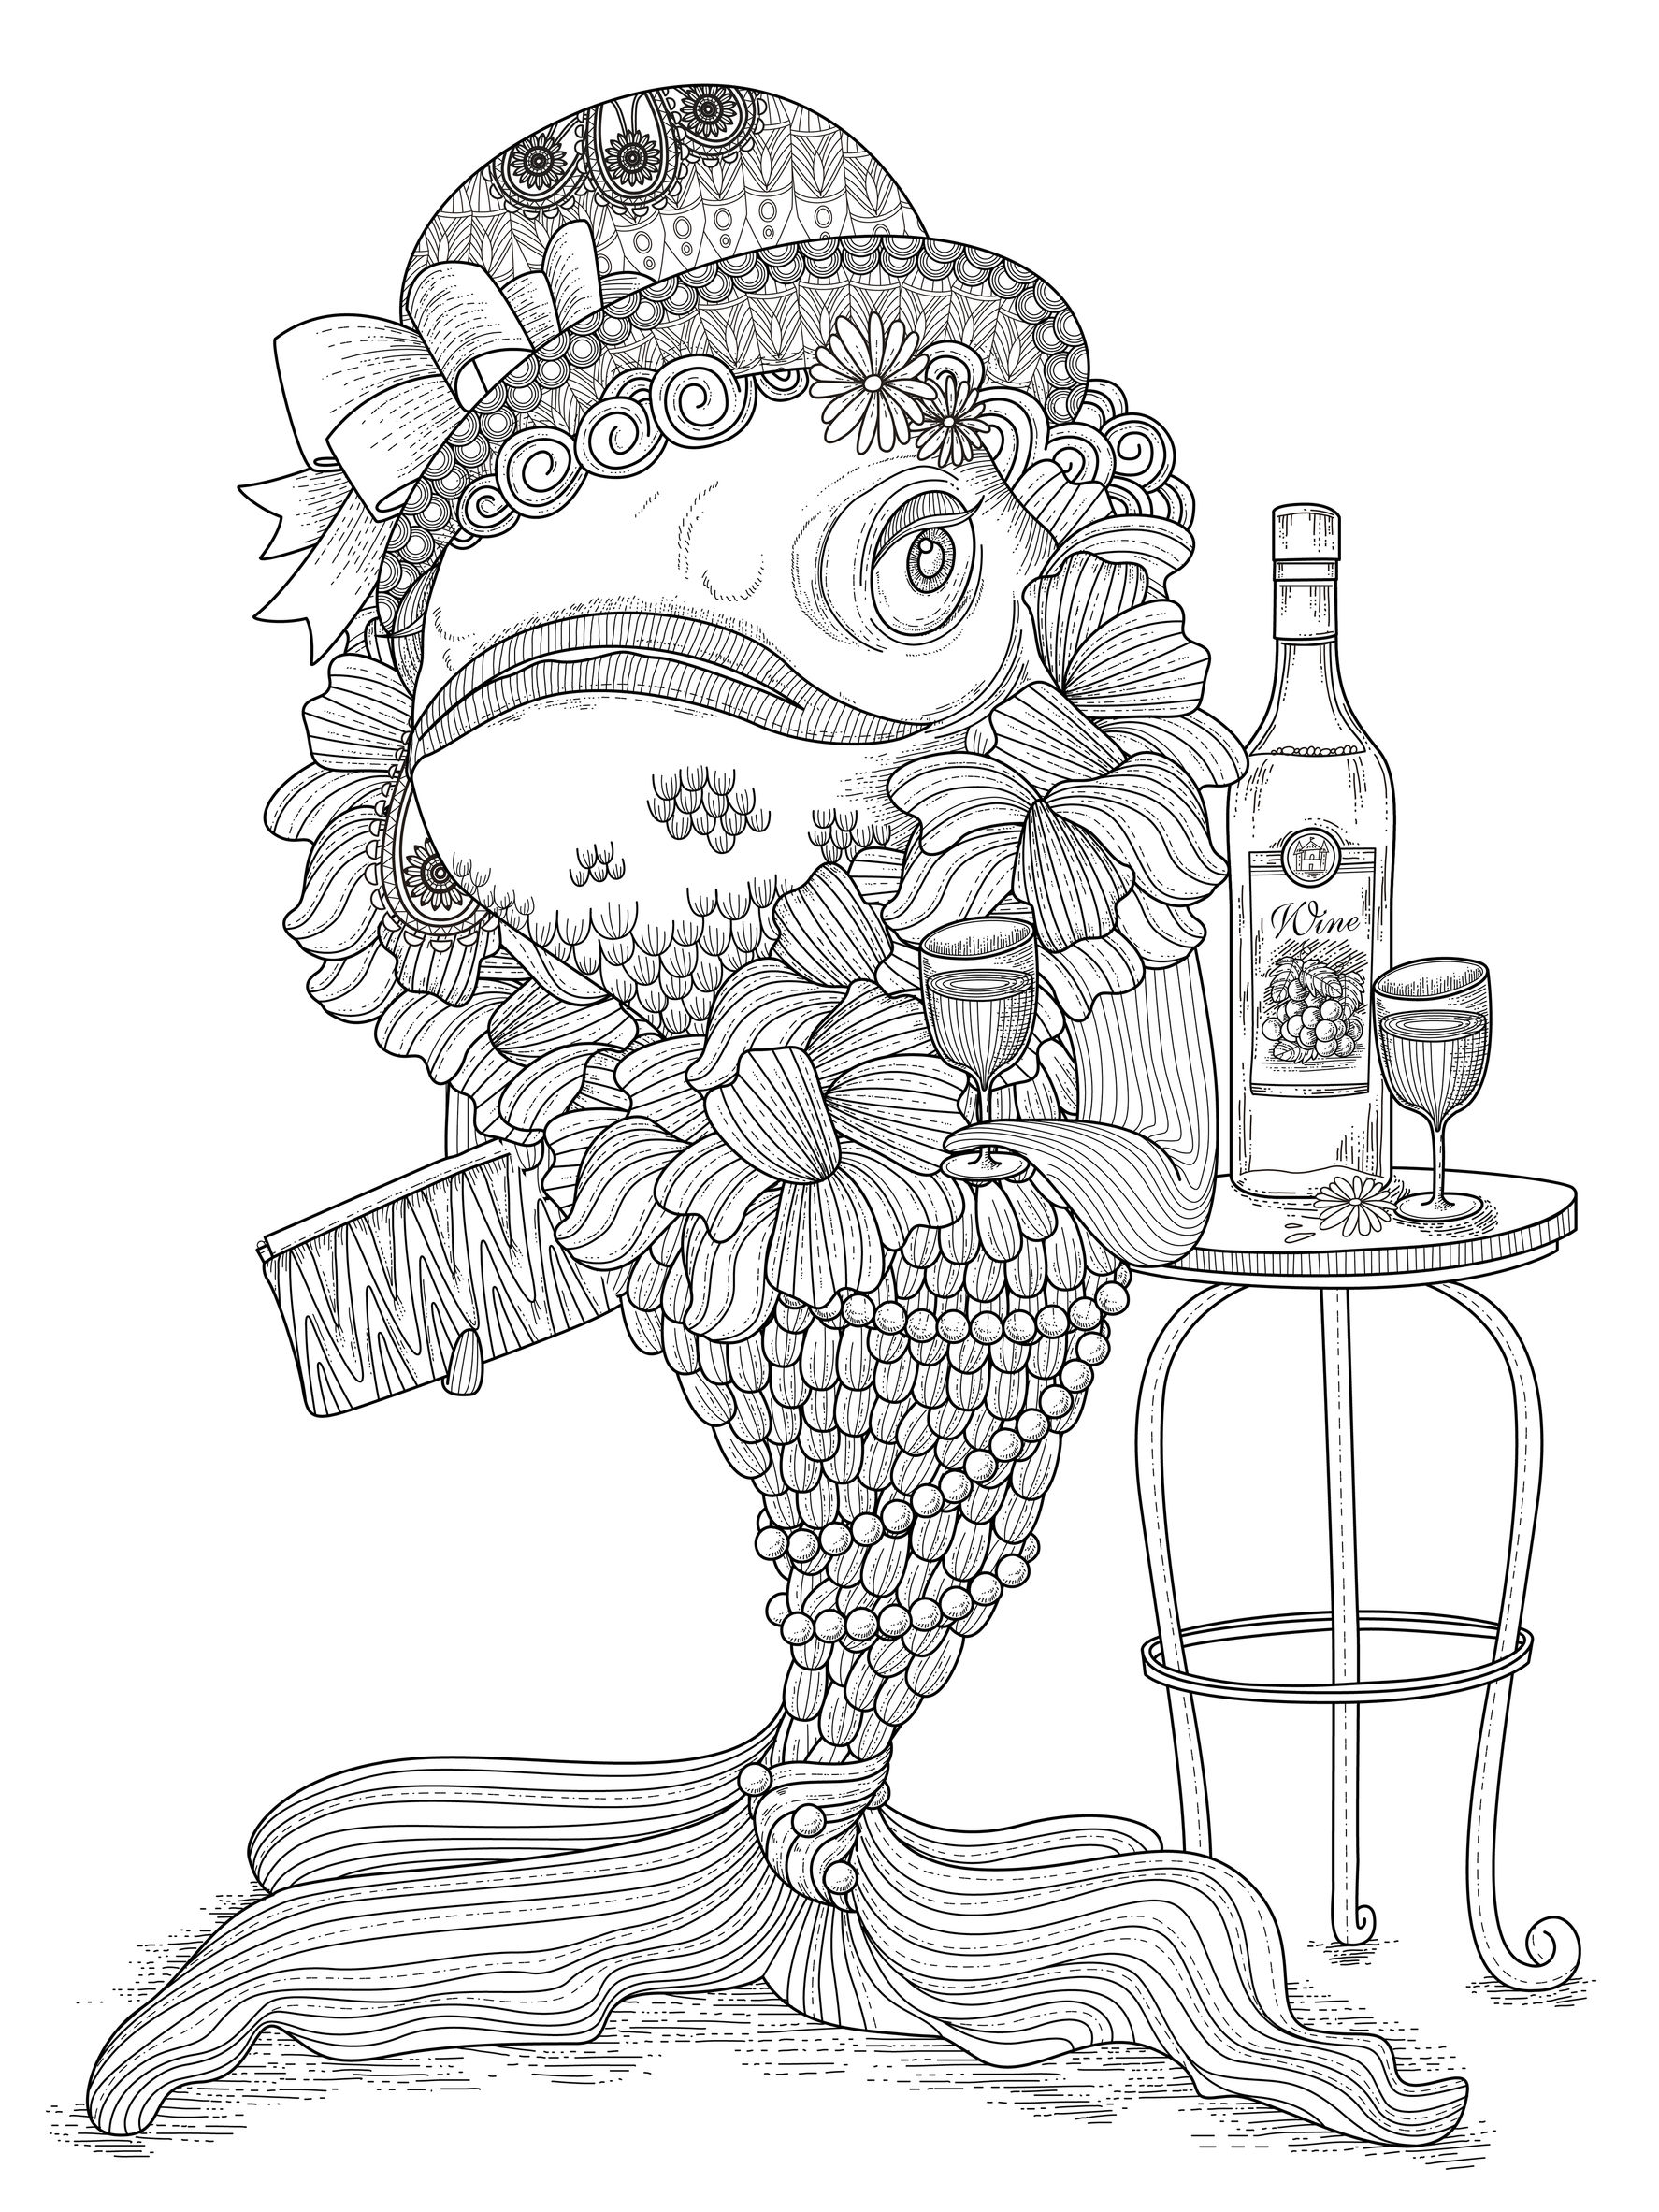 An coloring page of a fish very funny, Artist : Kchung